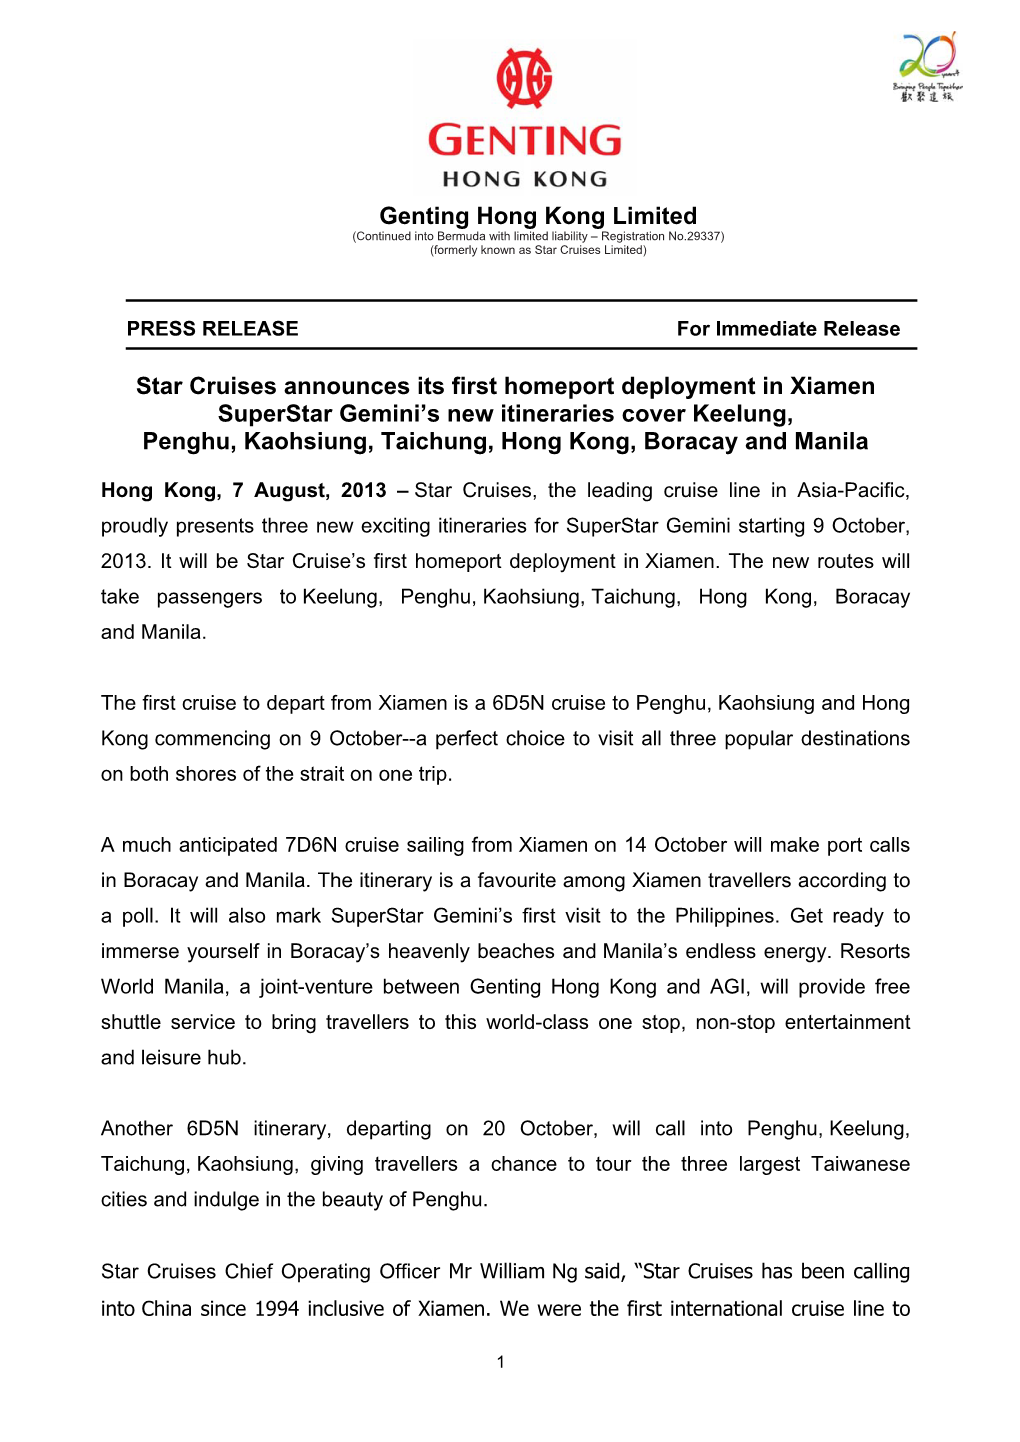 Star Cruises Announces Its First Homeport Deployment in Xiamen